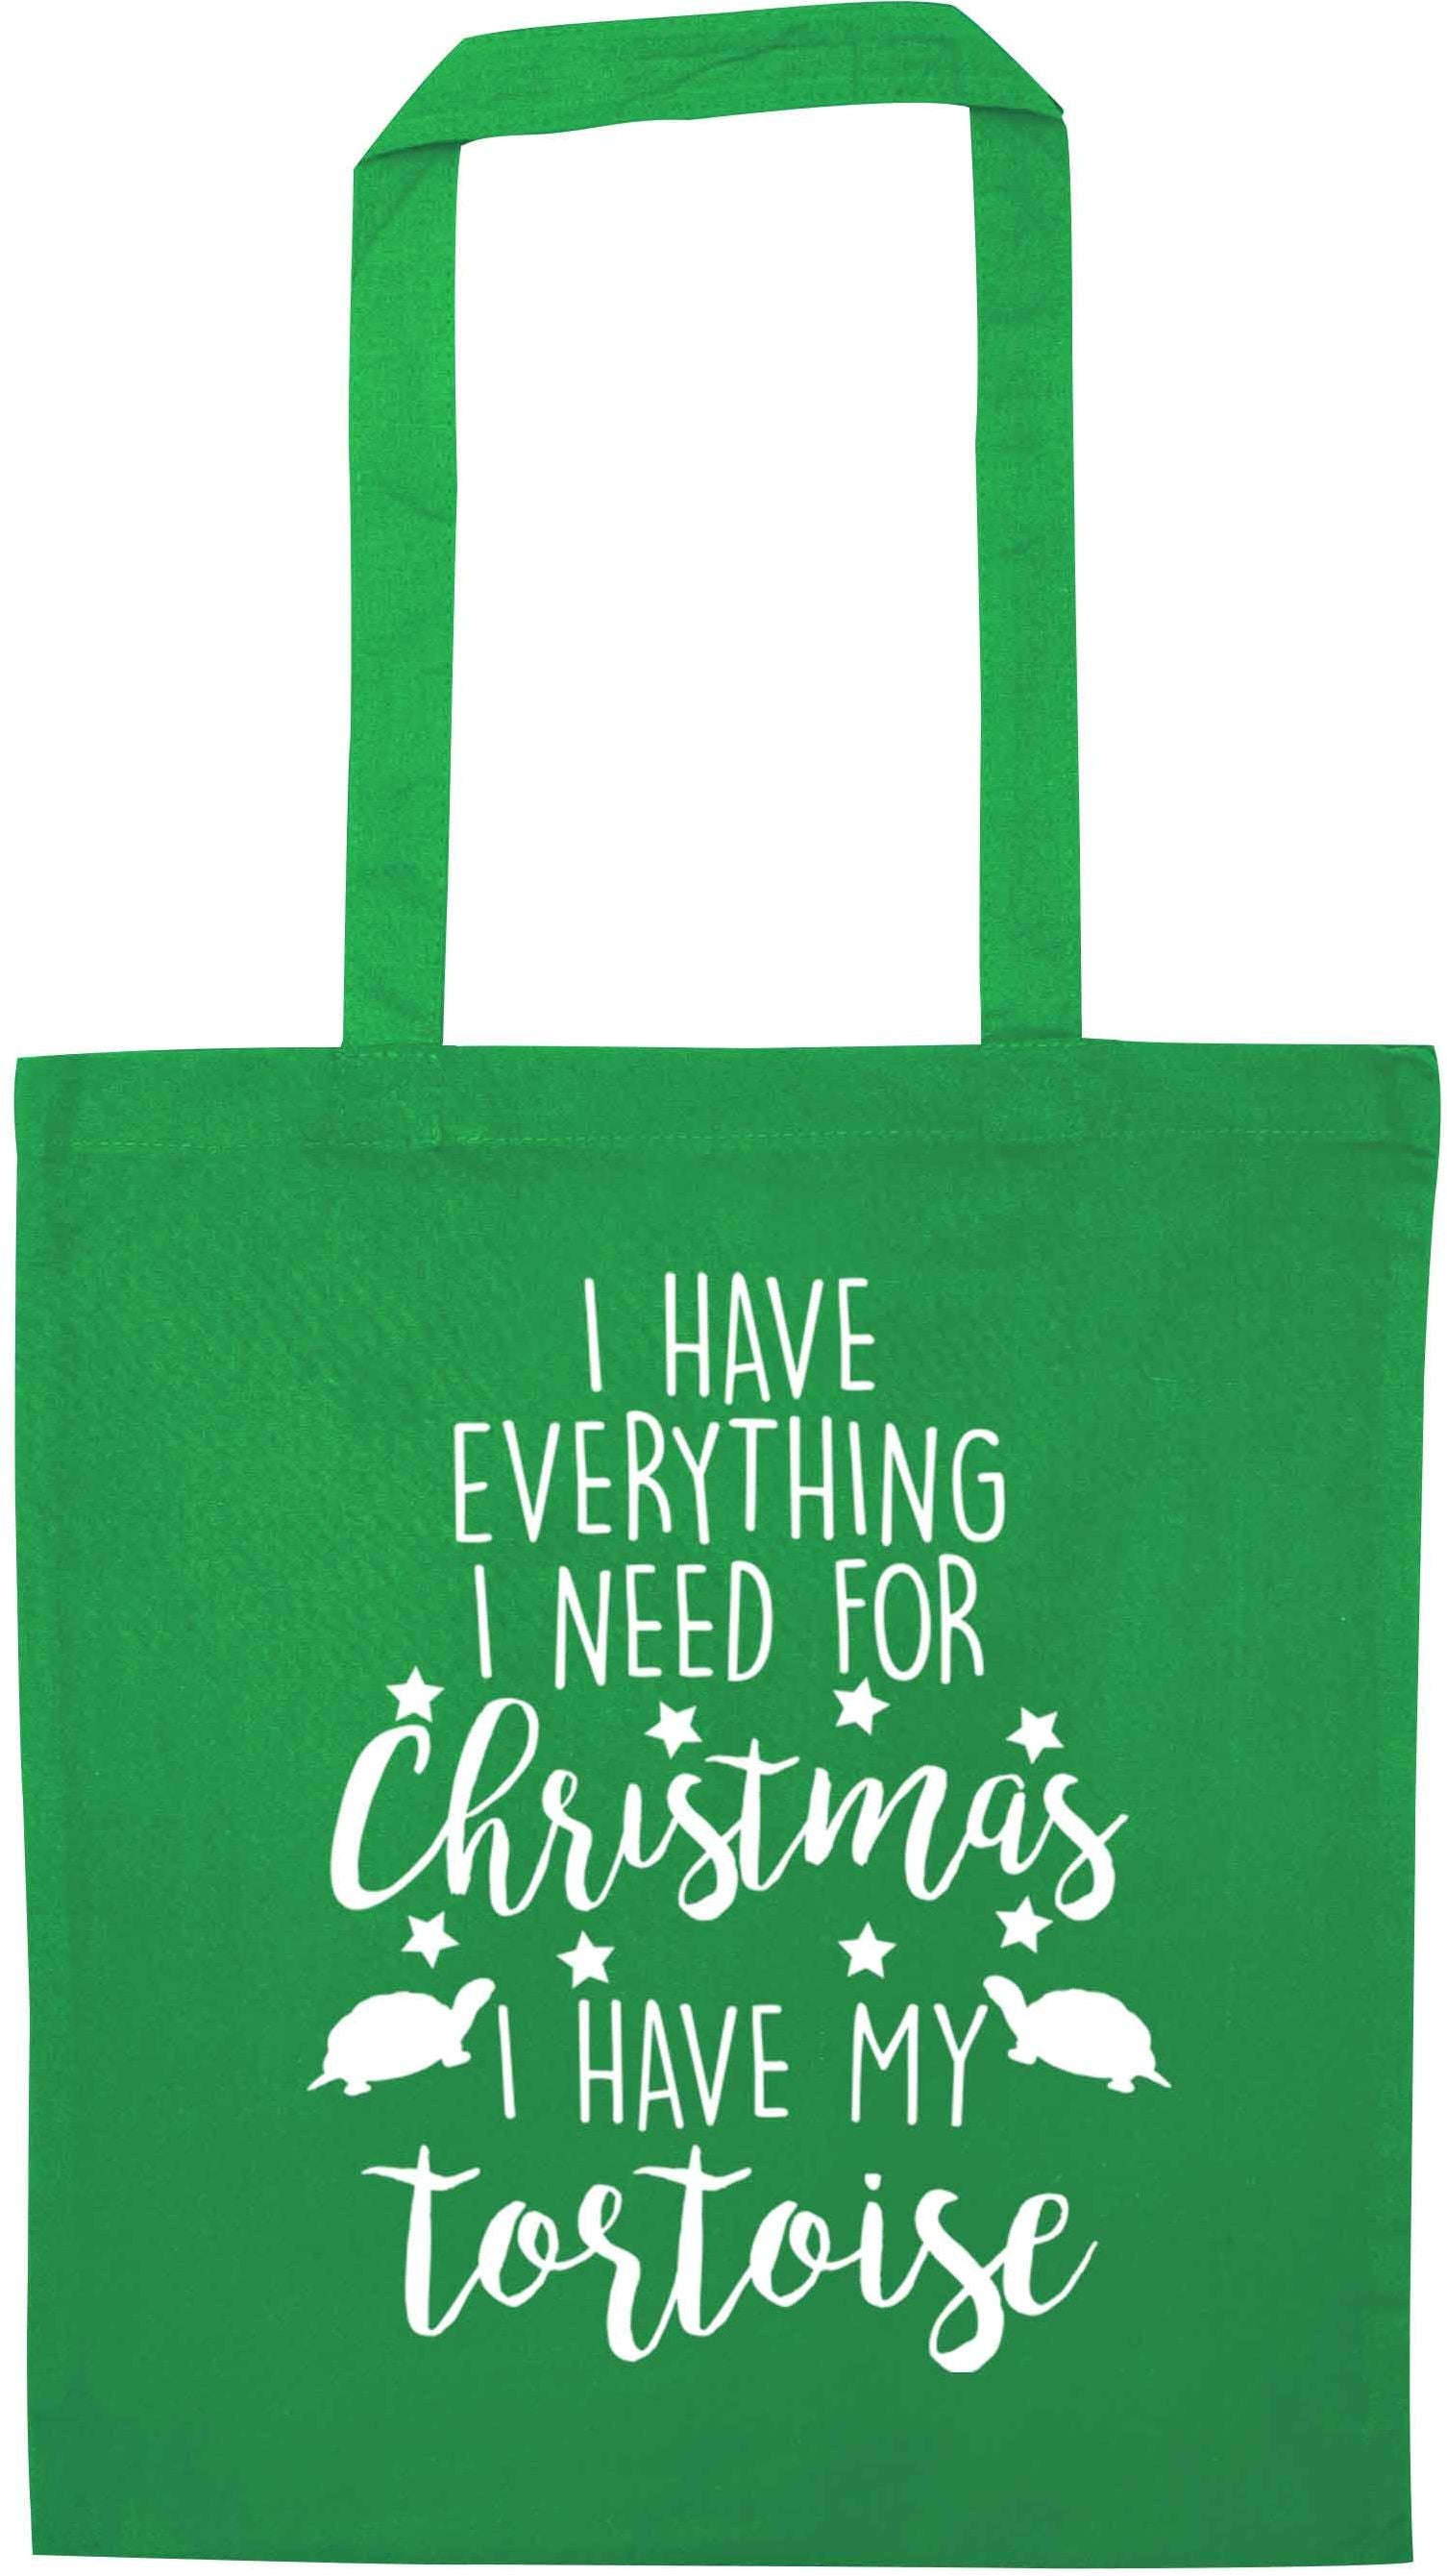 I have everything I need for Christmas I have my tortoise green tote bag